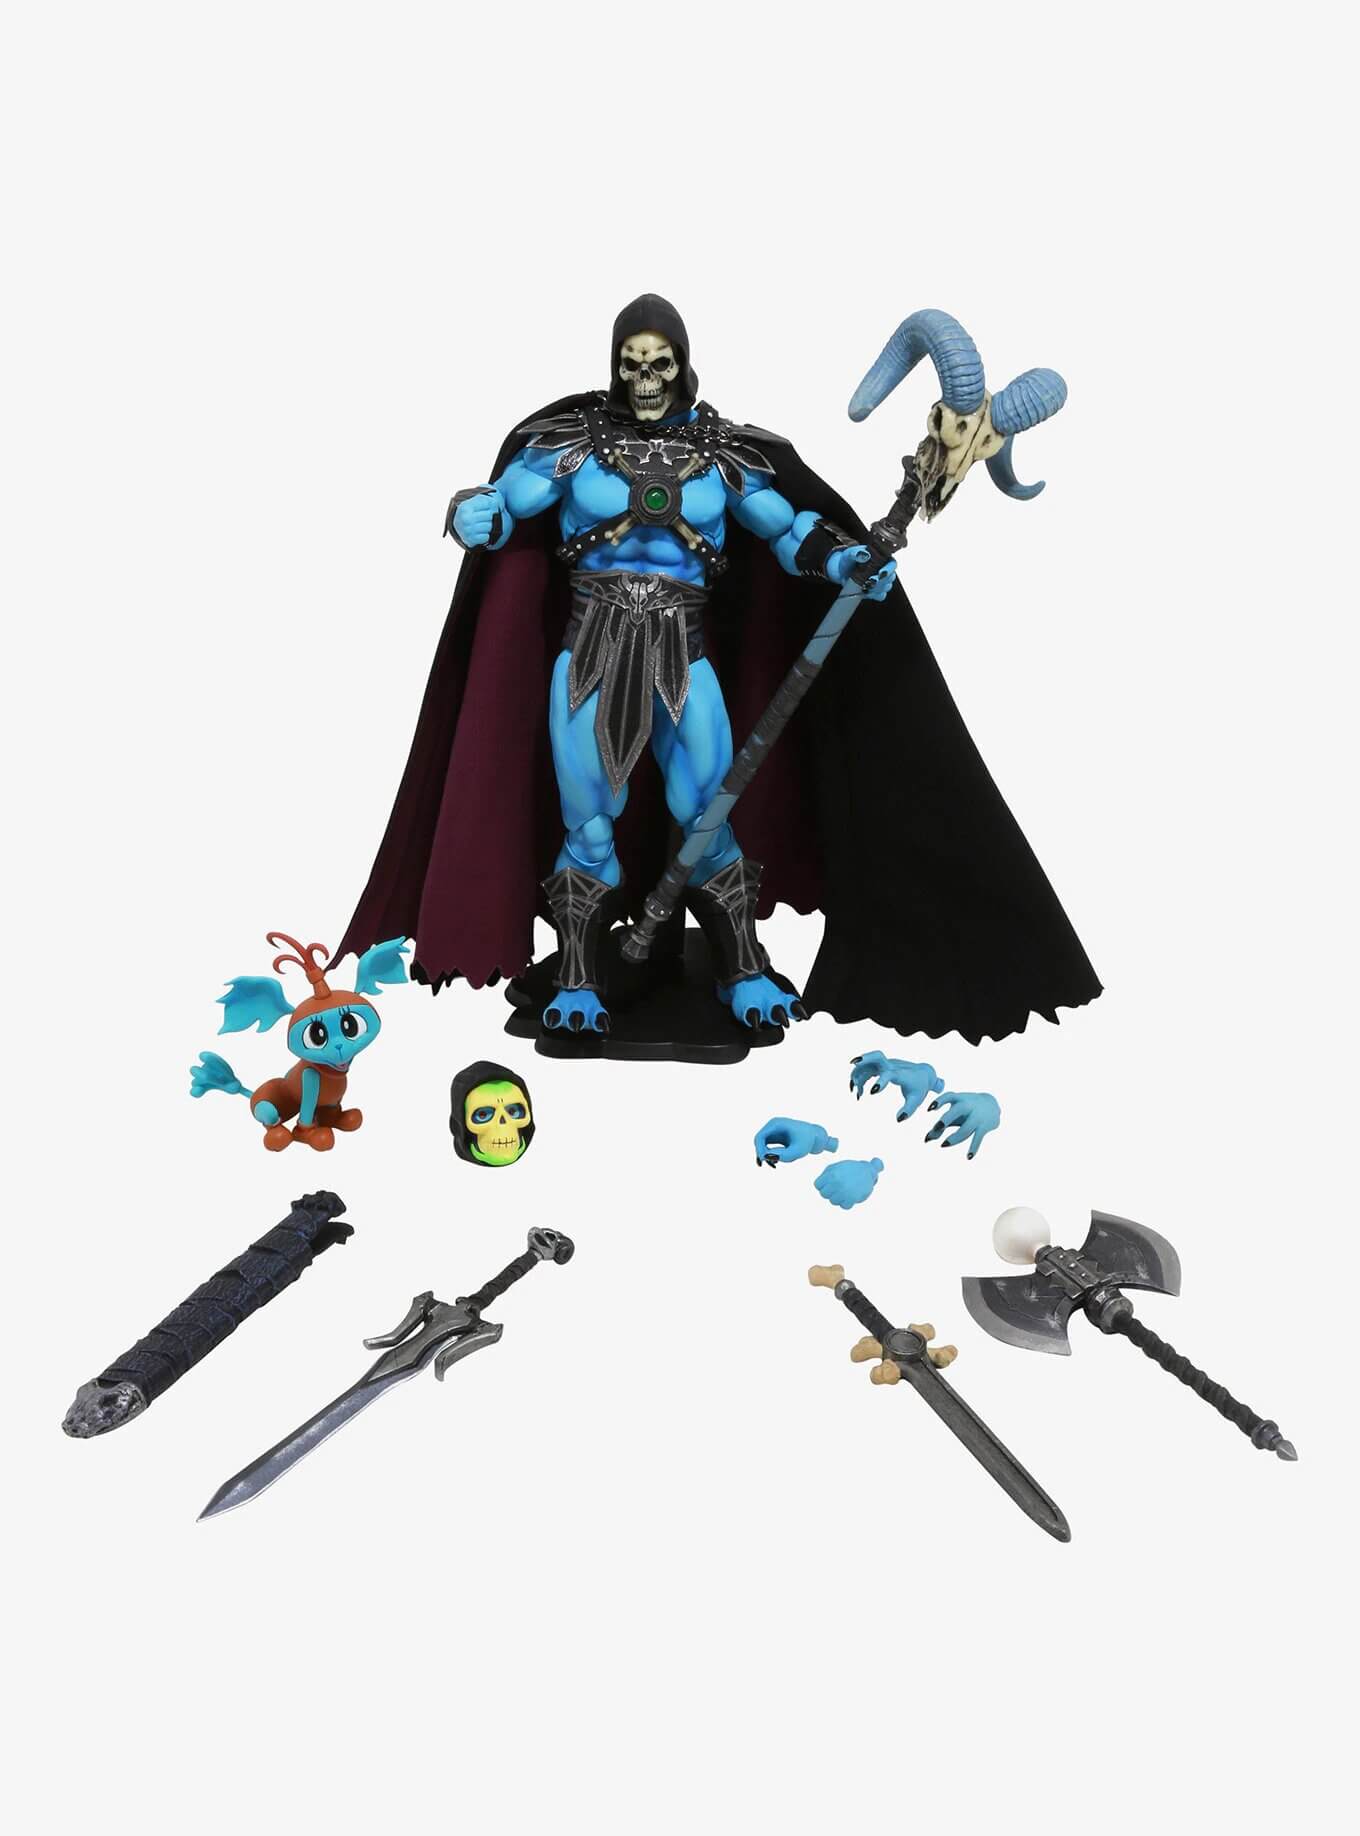 mondo hot topic skeletor 1/6 action figure with accessories